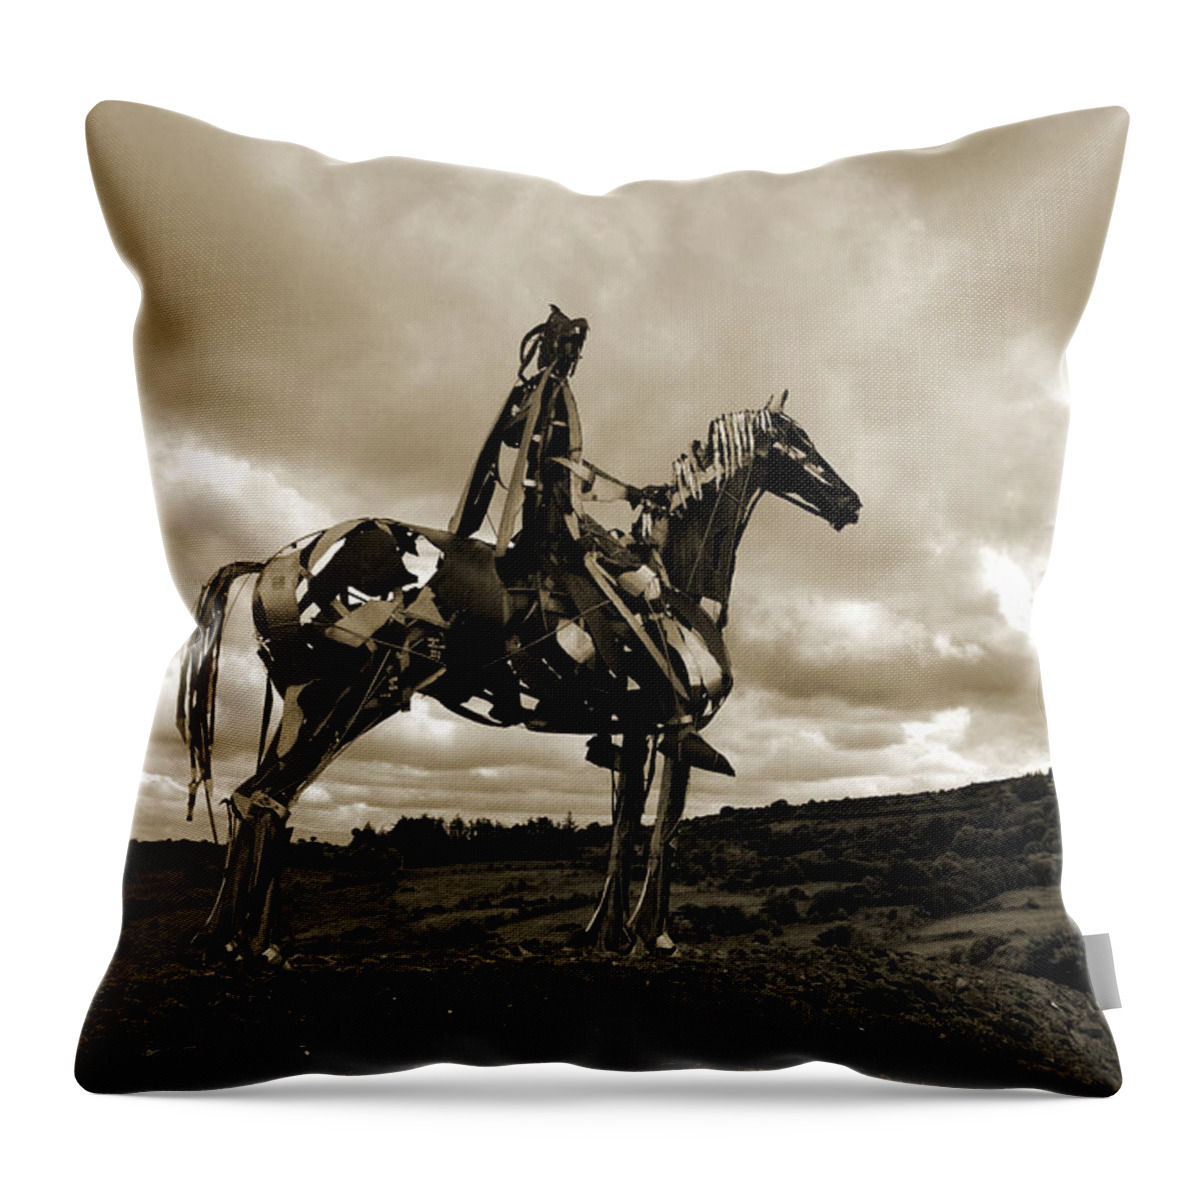 Gaelic Chieftain Throw Pillow featuring the photograph Gaelic Chieftain. by Terence Davis